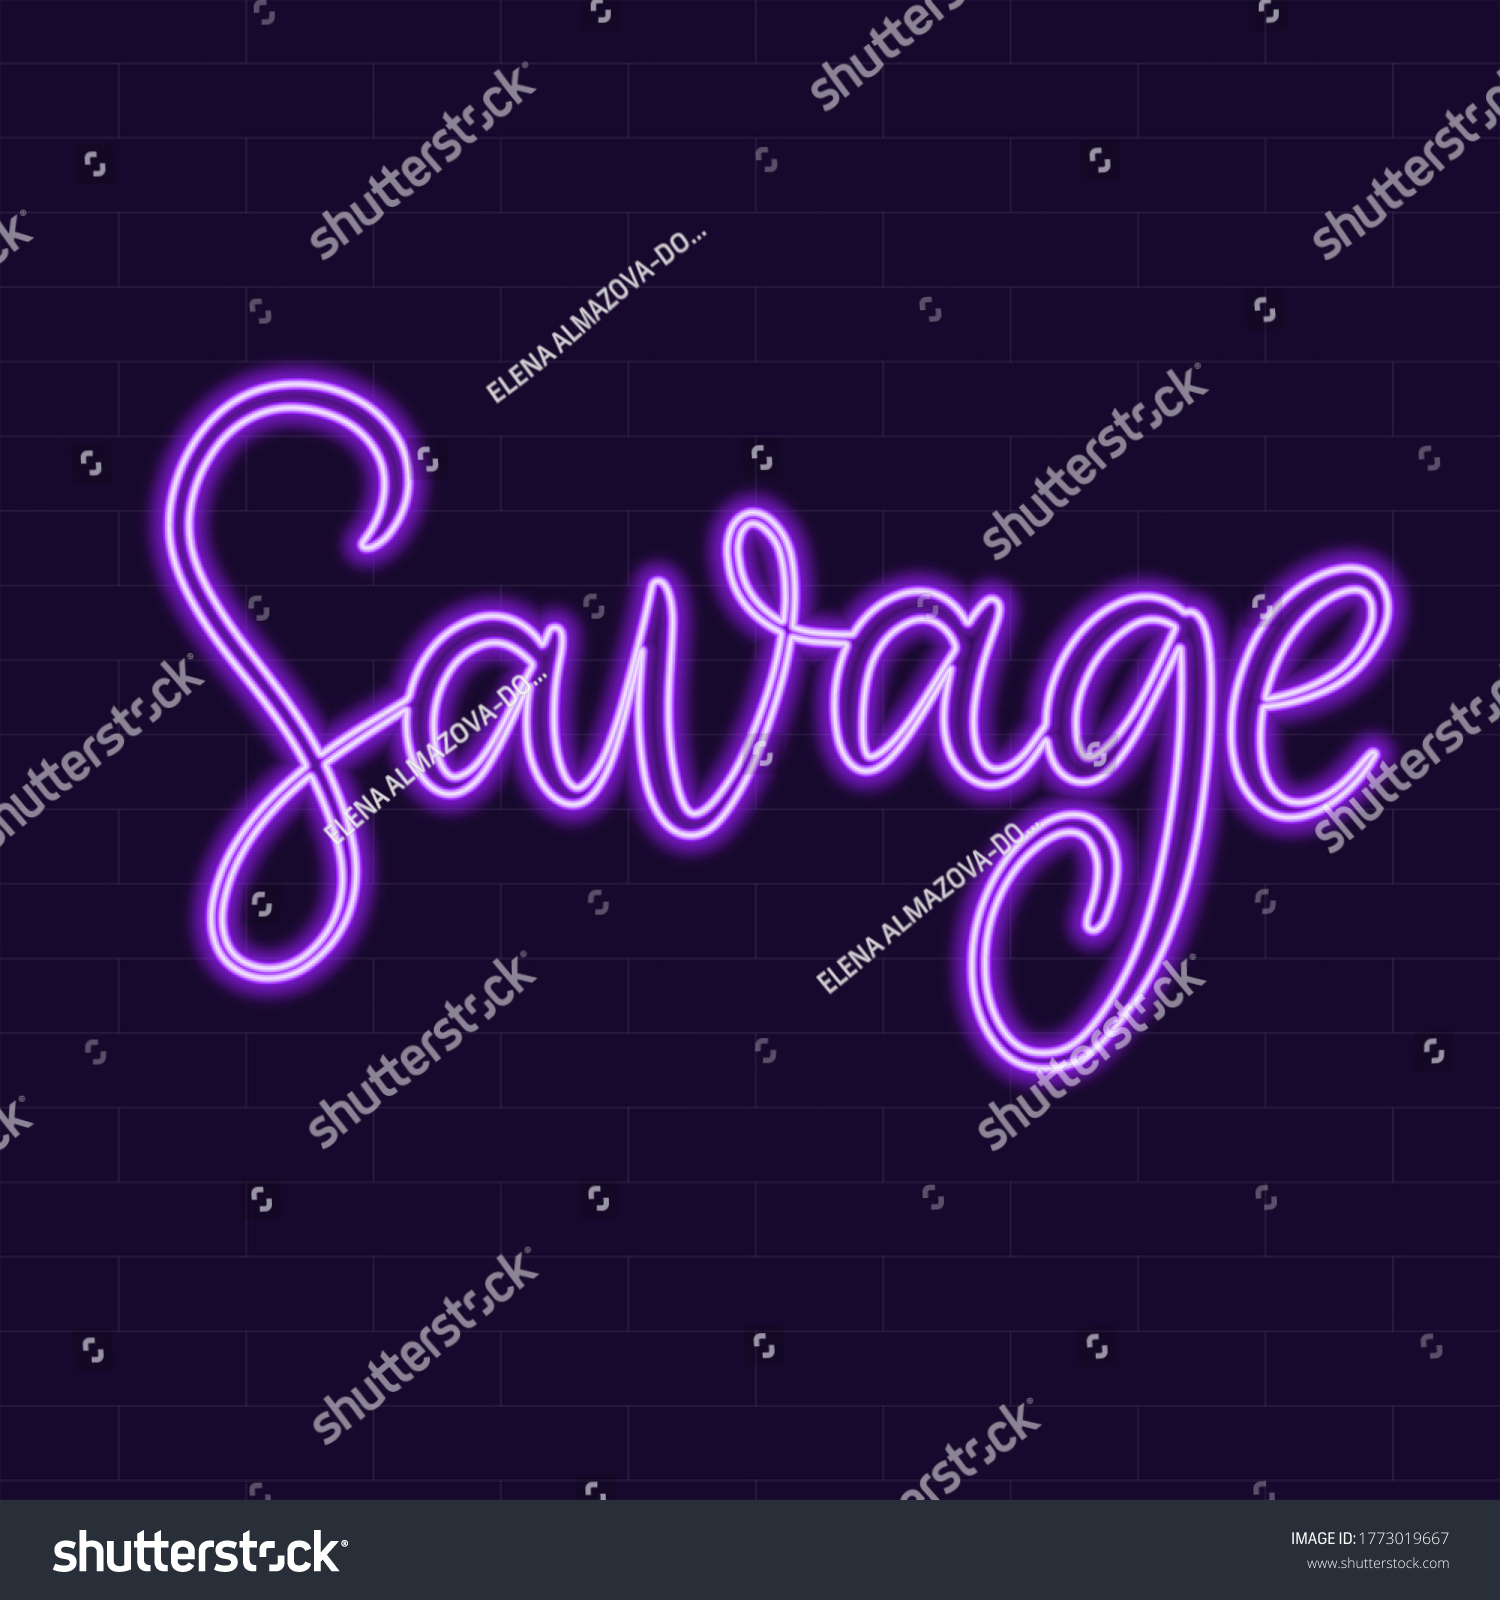 Savage Neon Sign Calligraphic Lettering Vector Stock Vector (Royalty